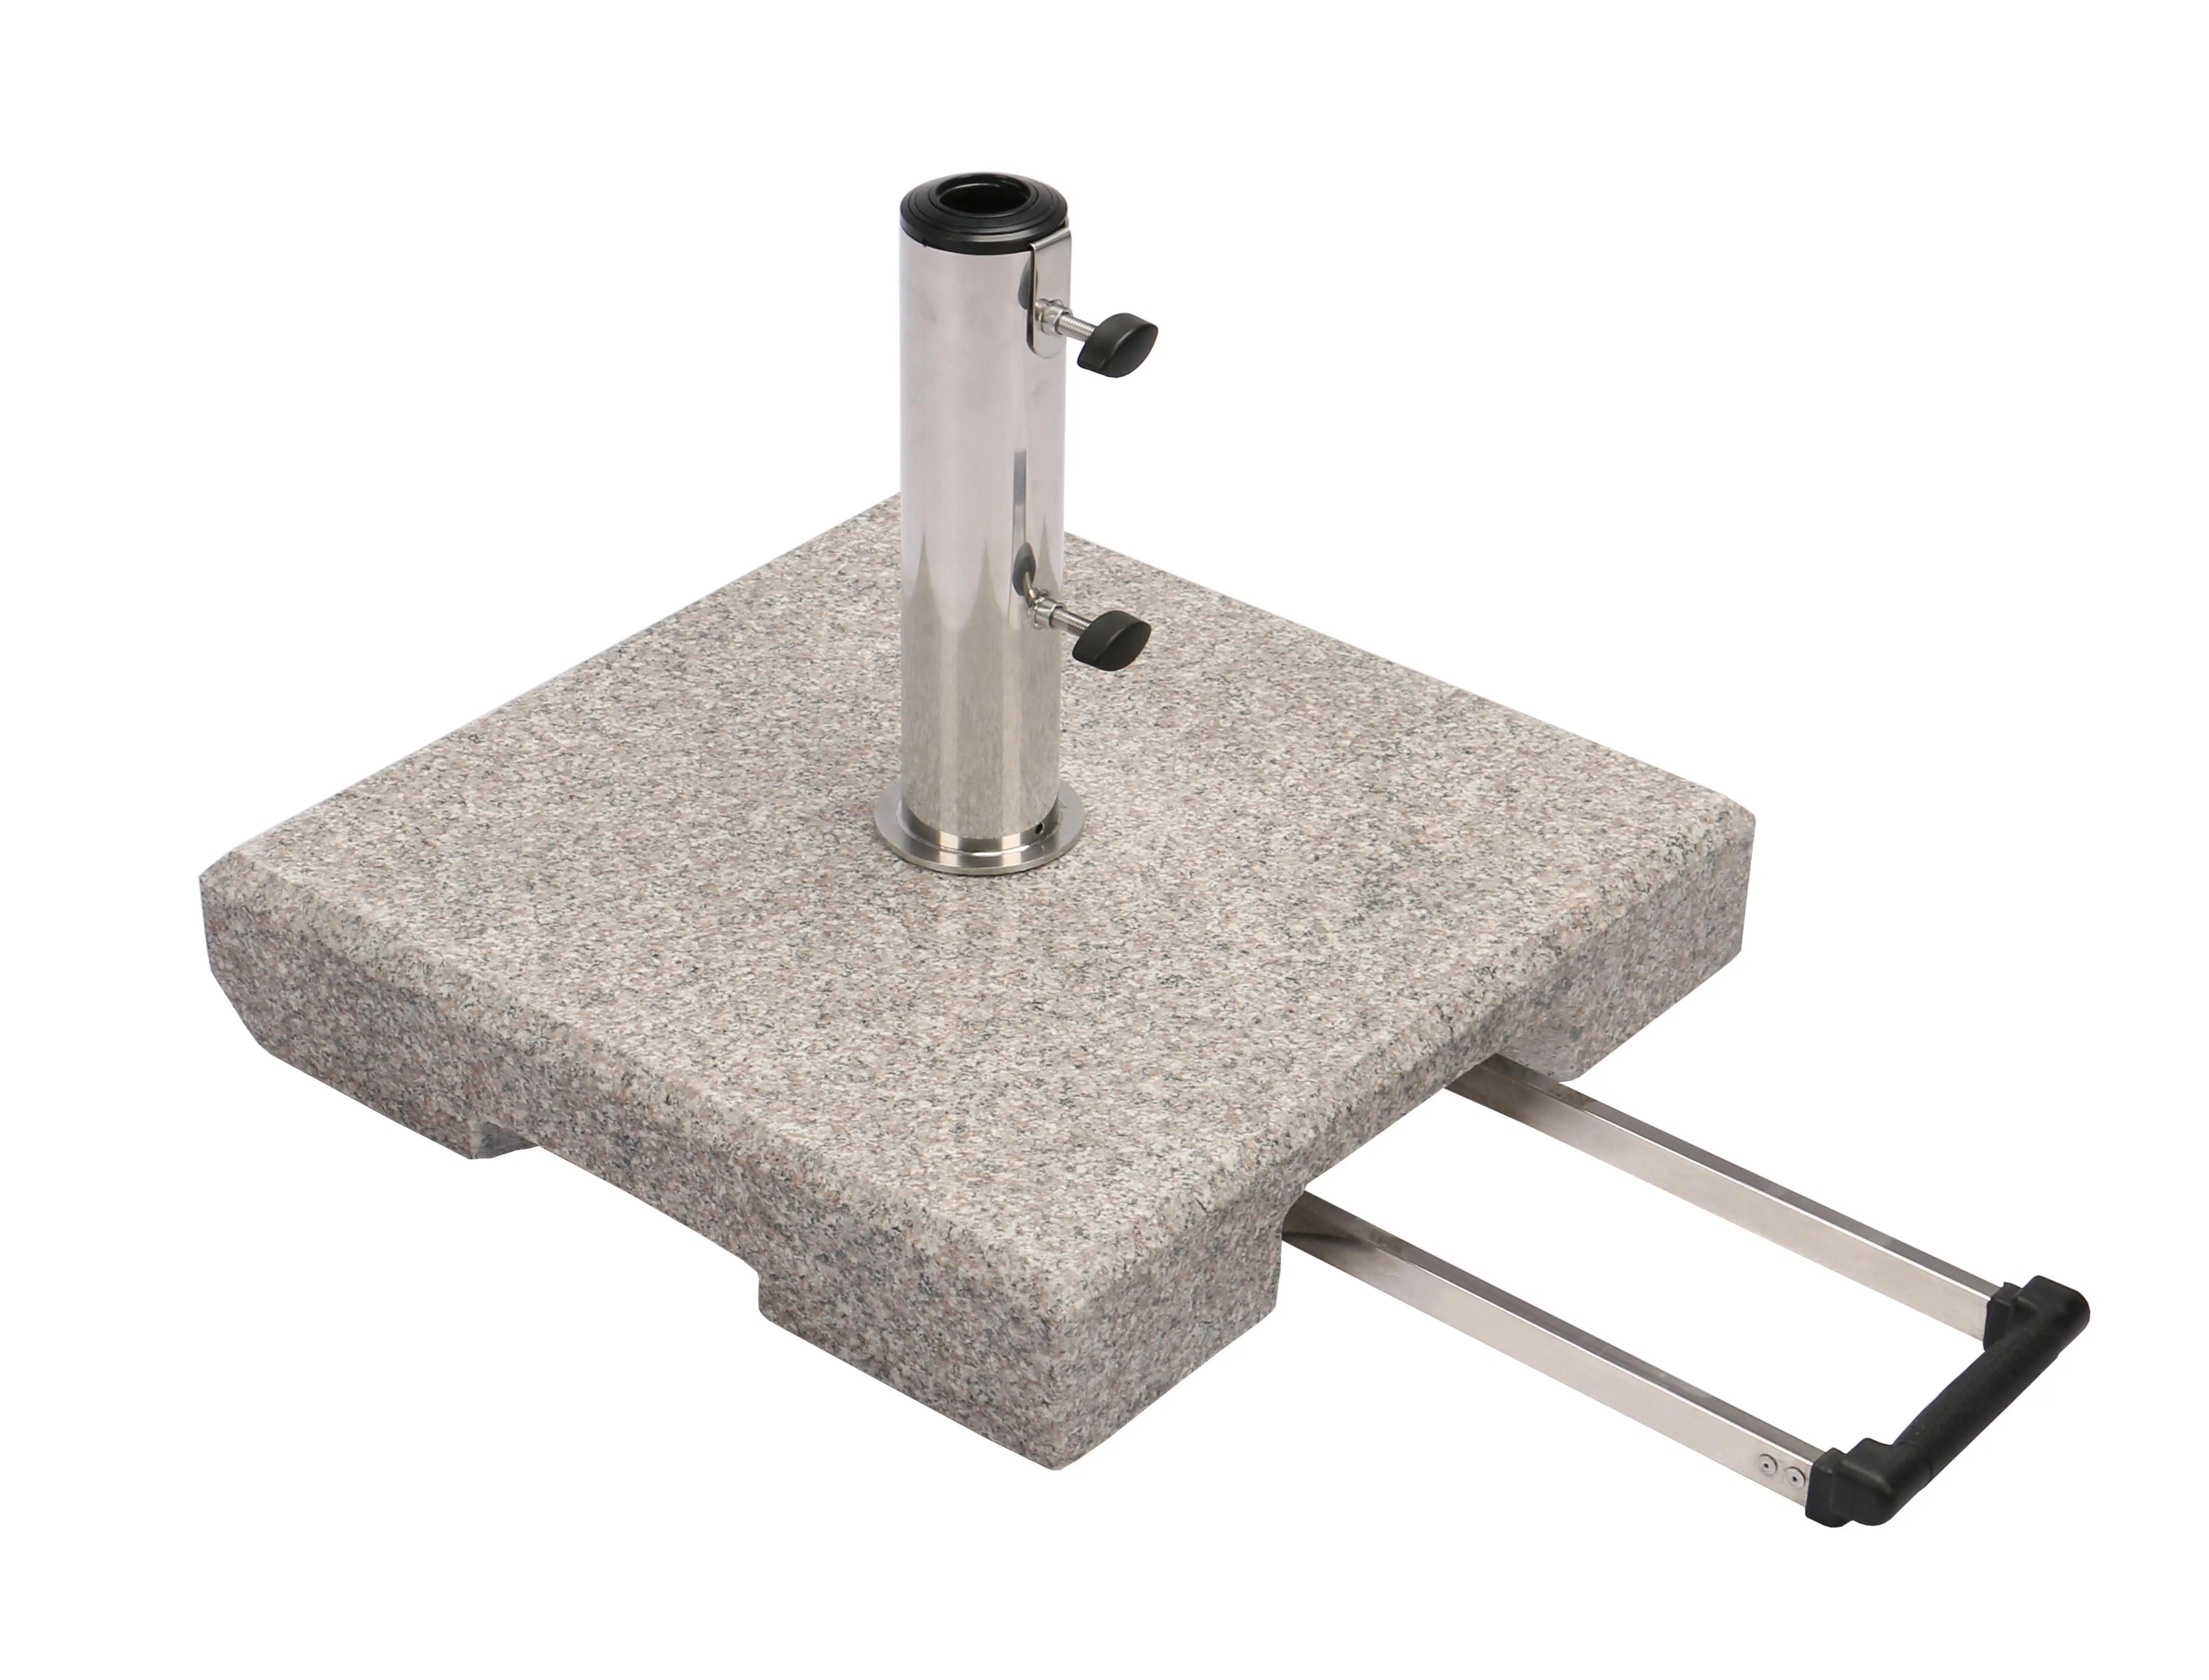 Made In China Superior Quality Granite Stand Parasol Umbrella Base With Wheels